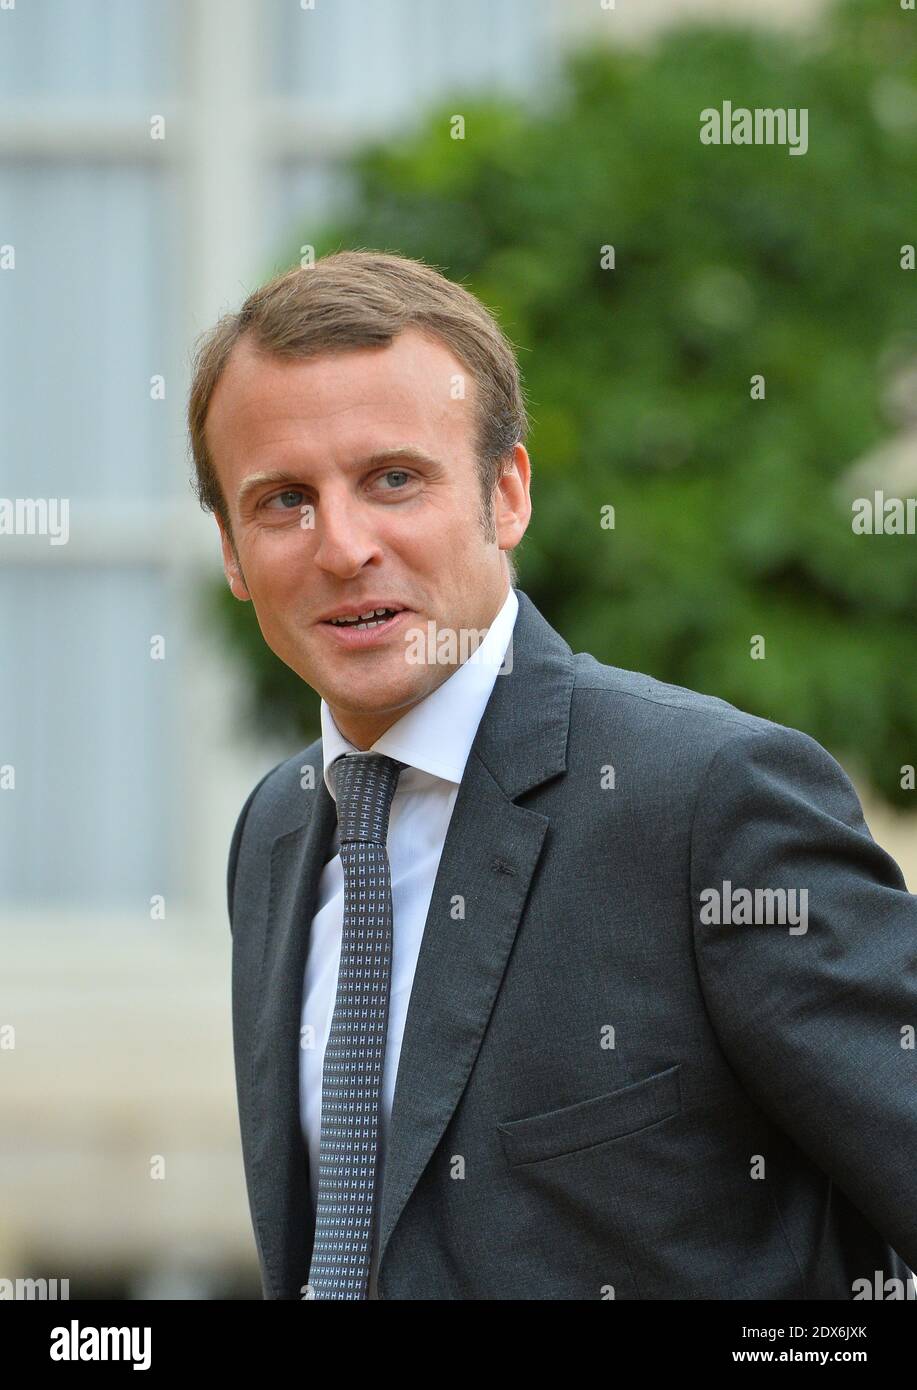 Newly-appointed Economy Minister Emmanuel Macron arriving at the Elysee presidential palace in Paris, France before a weekly cabinet meeting. French President Francois Hollande on August 27 installed a former banker and ally as economy minister in an emergency reshuffle seen as the "last chance" to haul France out of the biggest crisis of his presidency. Hollande caught everyone off guard with the appointment of Emmanuel Macron, a 36-year-old ex-Rothschild banker and architect of the president's economic policy. Photo by Christian Liewig/ABACAPRESS.COM Stock Photo